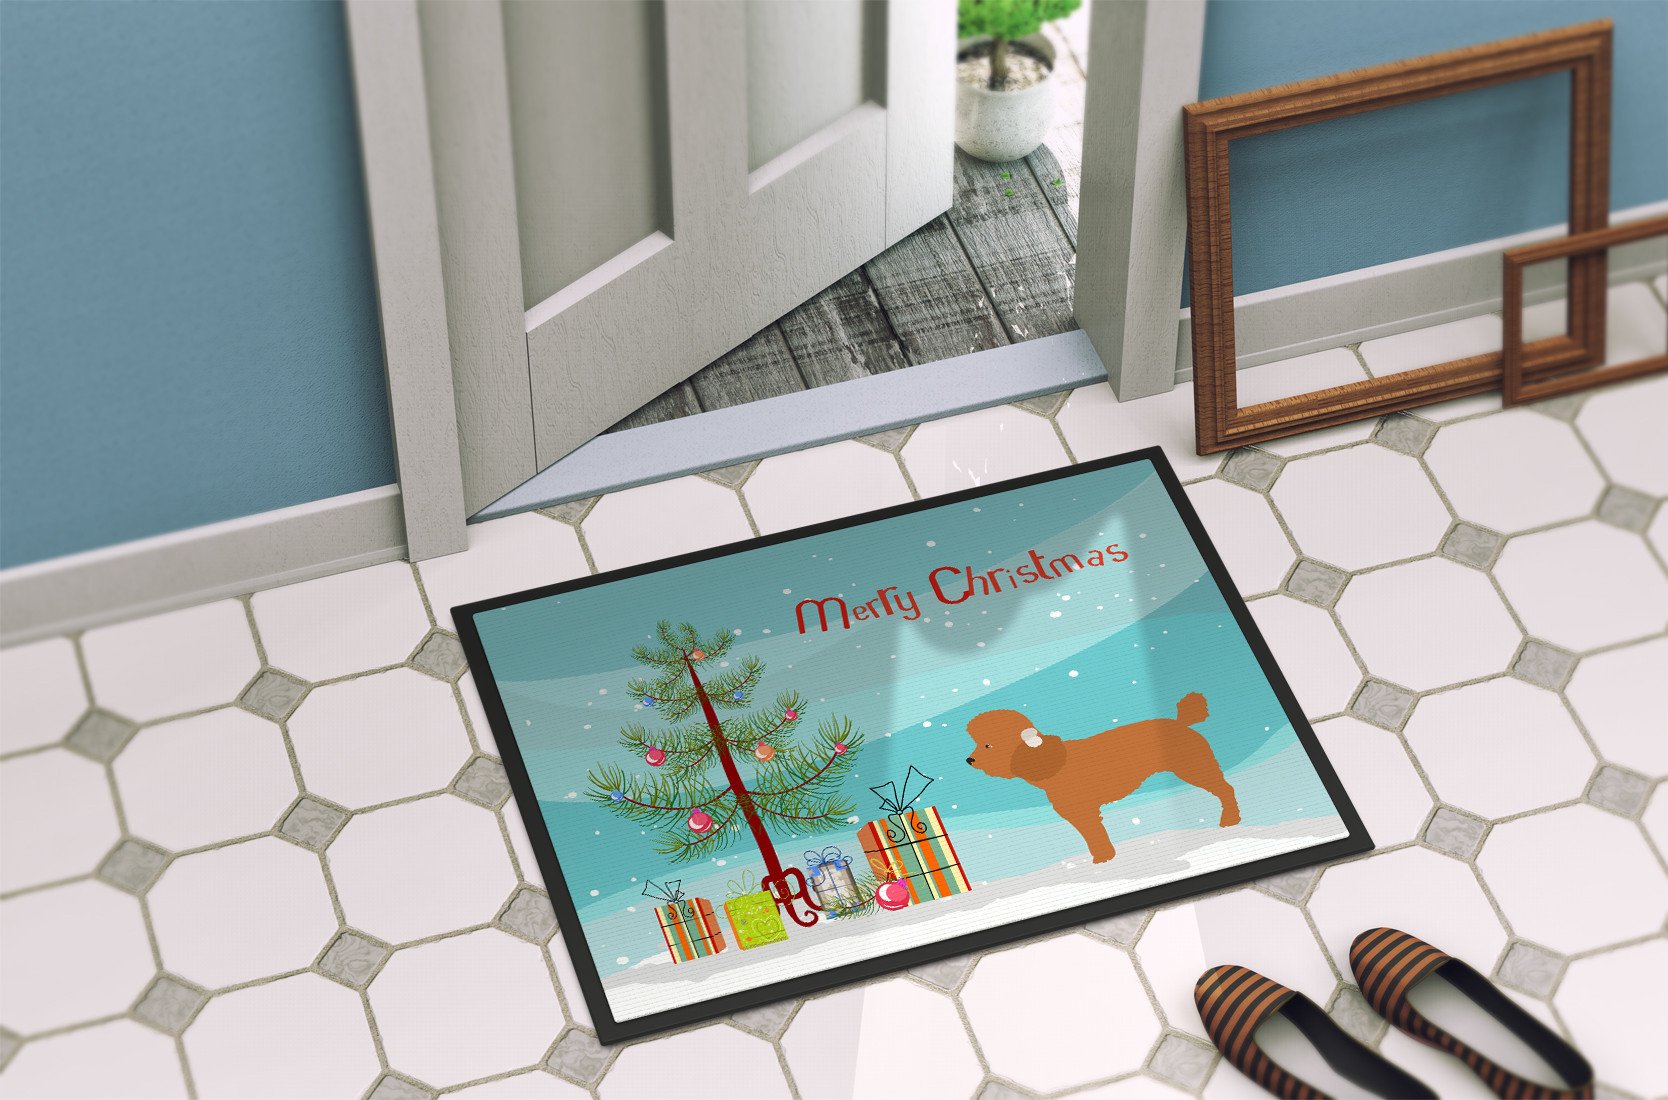 Toy Poodle Christmas Indoor or Outdoor Mat 24x36 BB8478JMAT by Caroline's Treasures